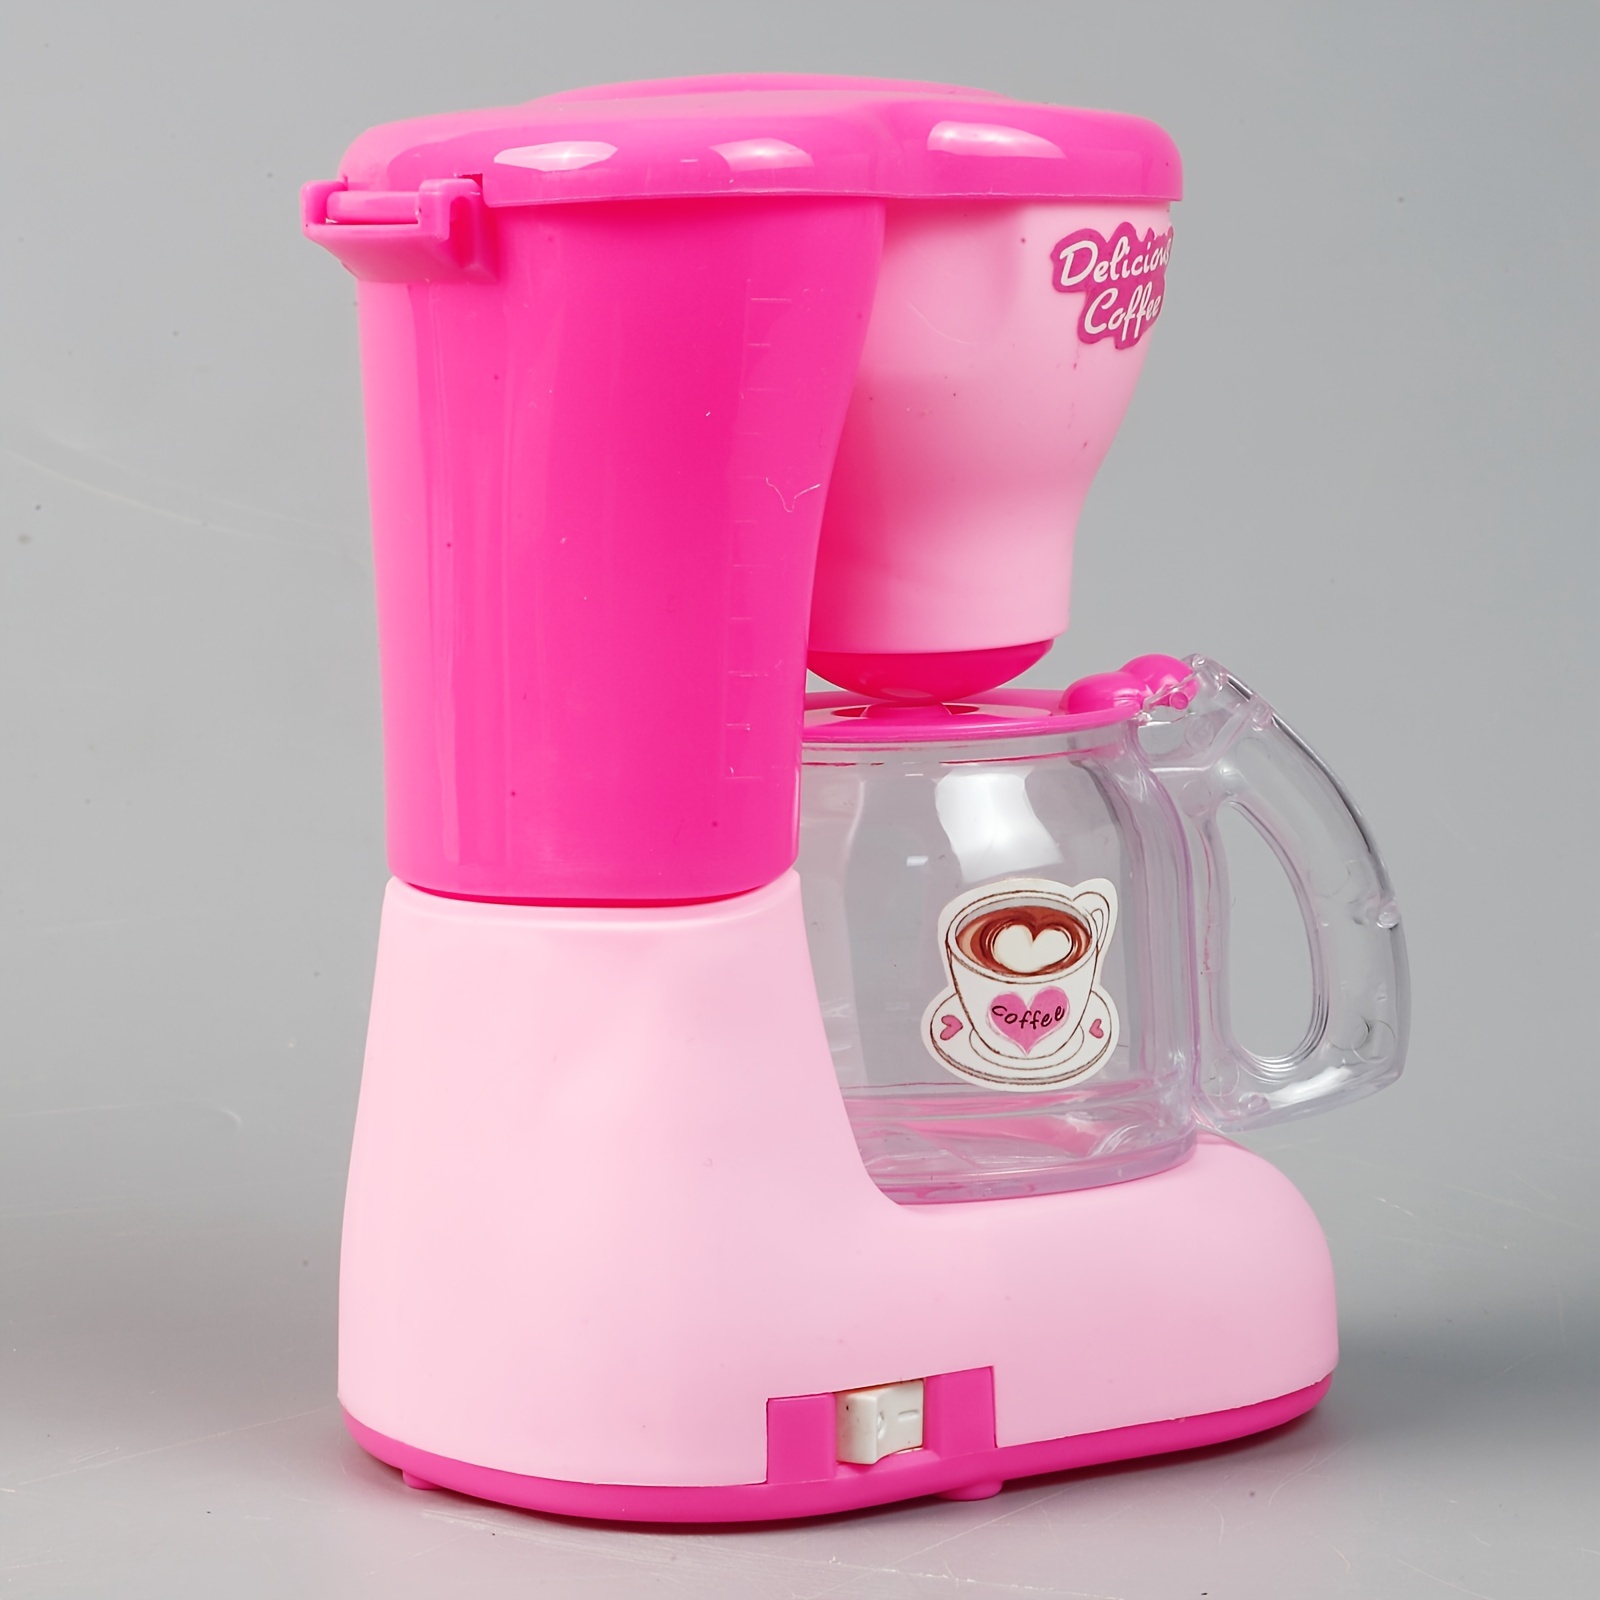 Little Treasures Mini Kitchen Appliance Cooking Toy Play Set - Includes A Pretend Play Mini Microwave, Coffee Maker and Mini Toy Fridge with Toy